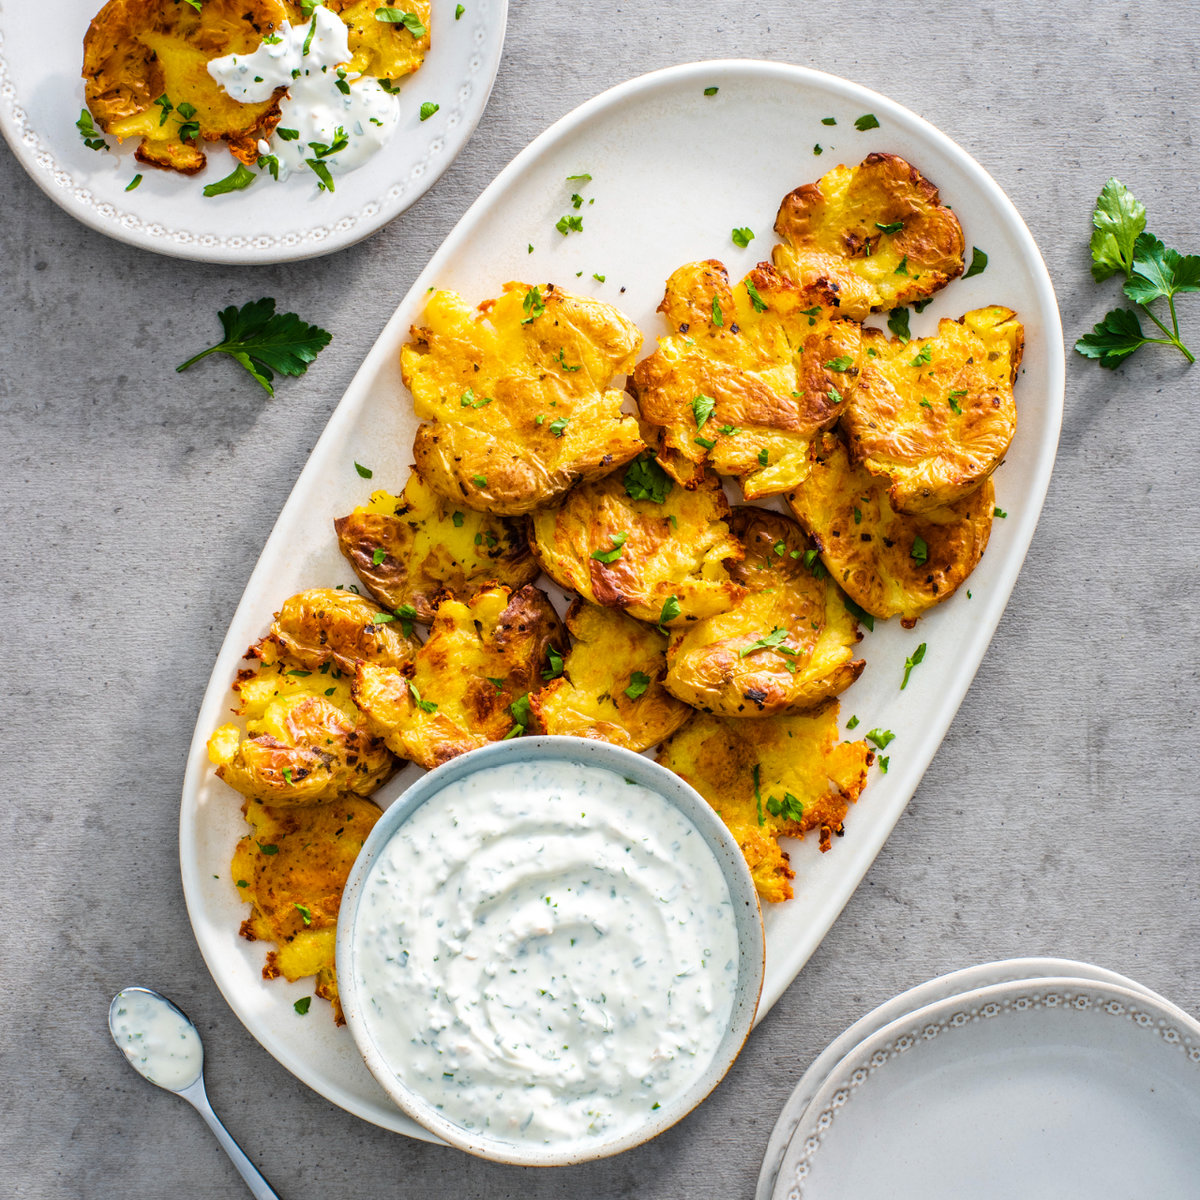 Crispy Herb Smashed Potatoes with Sour Cream and Chive Dip